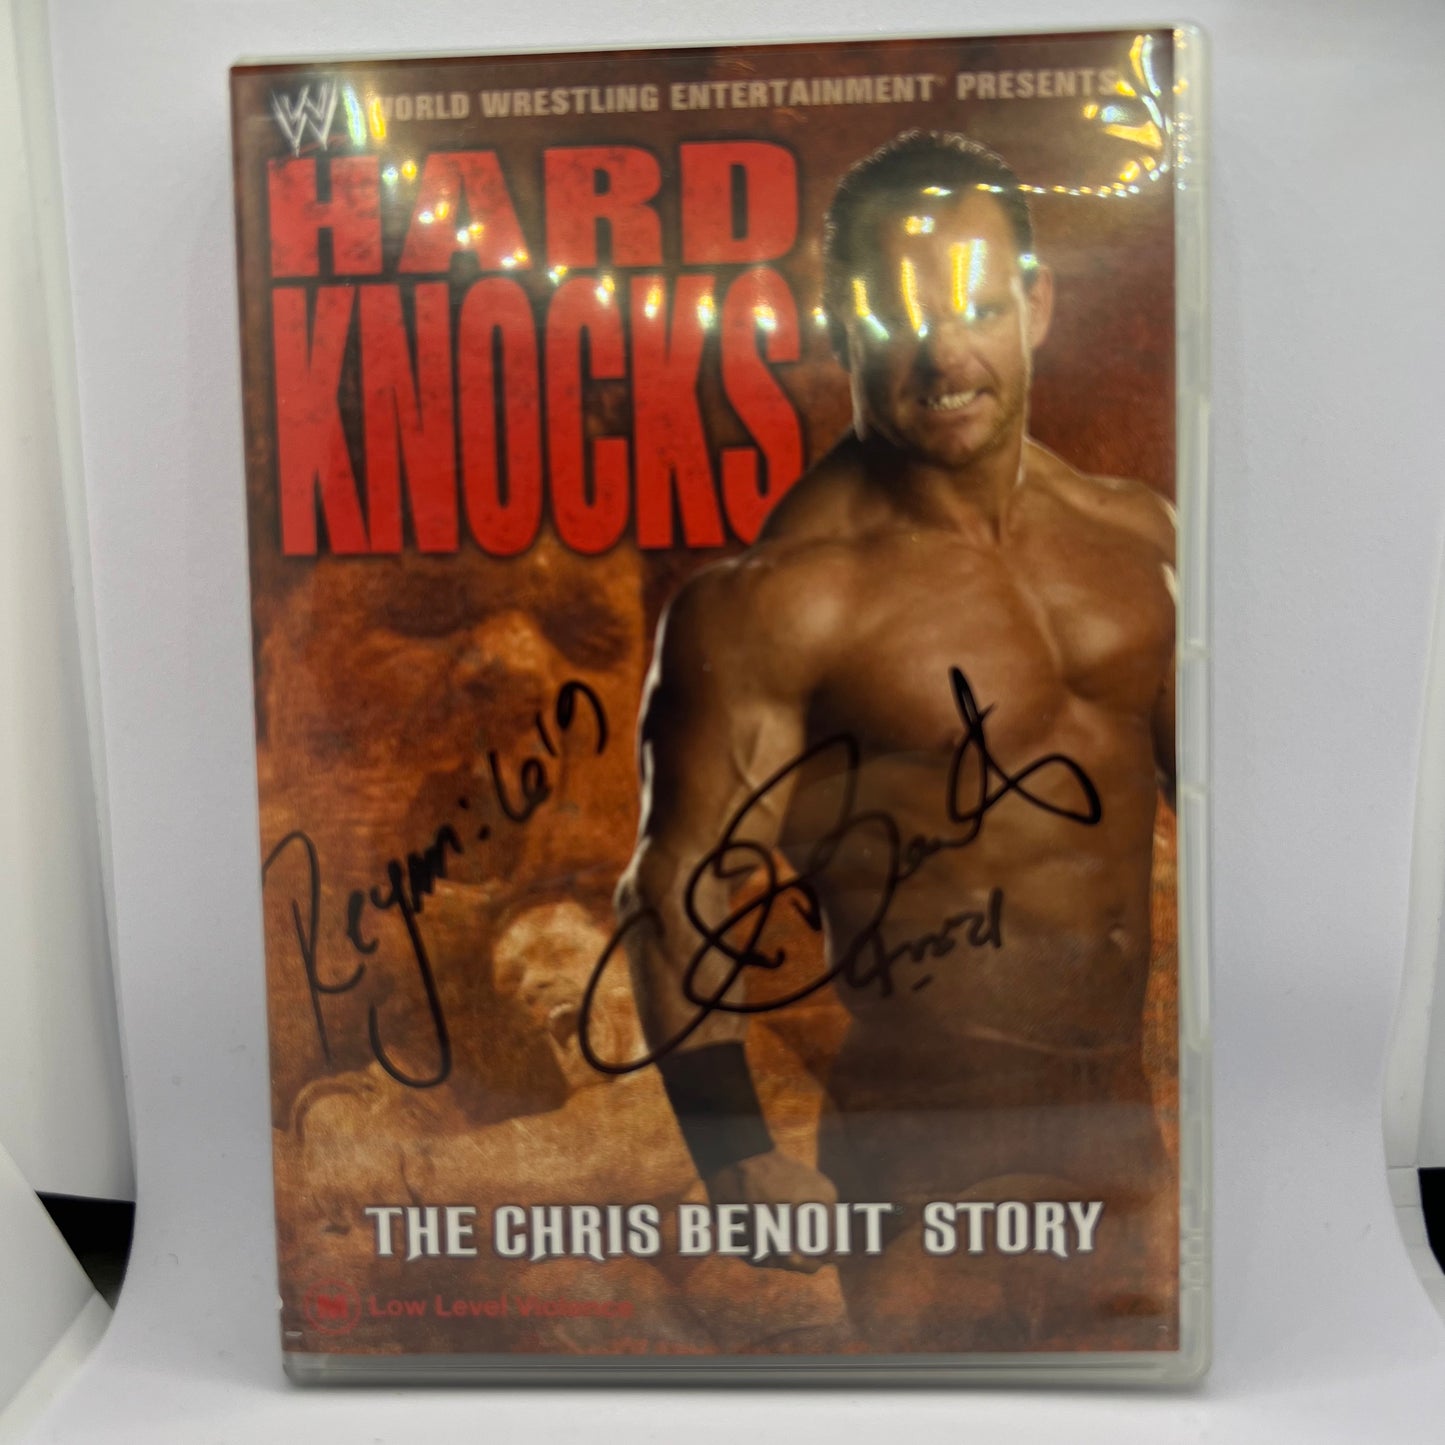 WWE Hard Knocks DVD Signed and Autographed by Chris Benoit and Rey Mysterio